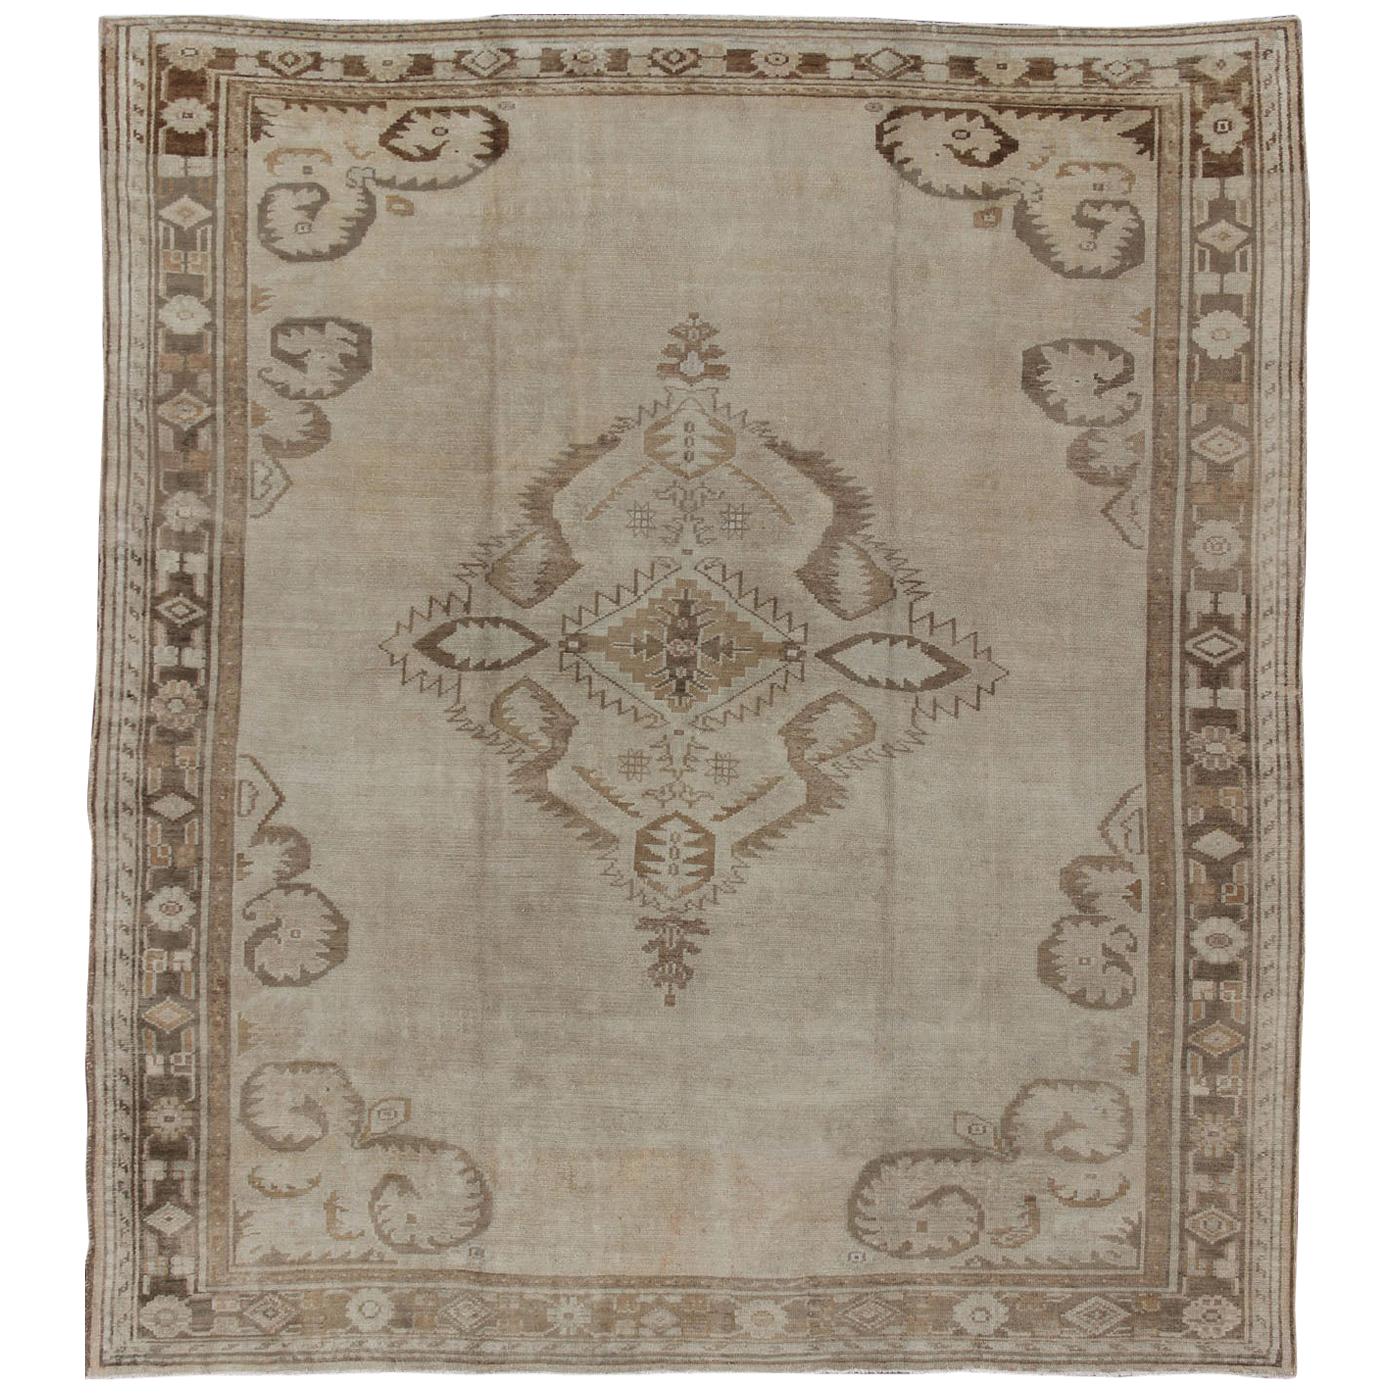 Large Square Size Vintage Turkish Oushak Rug in Earthy Tones With Medallion